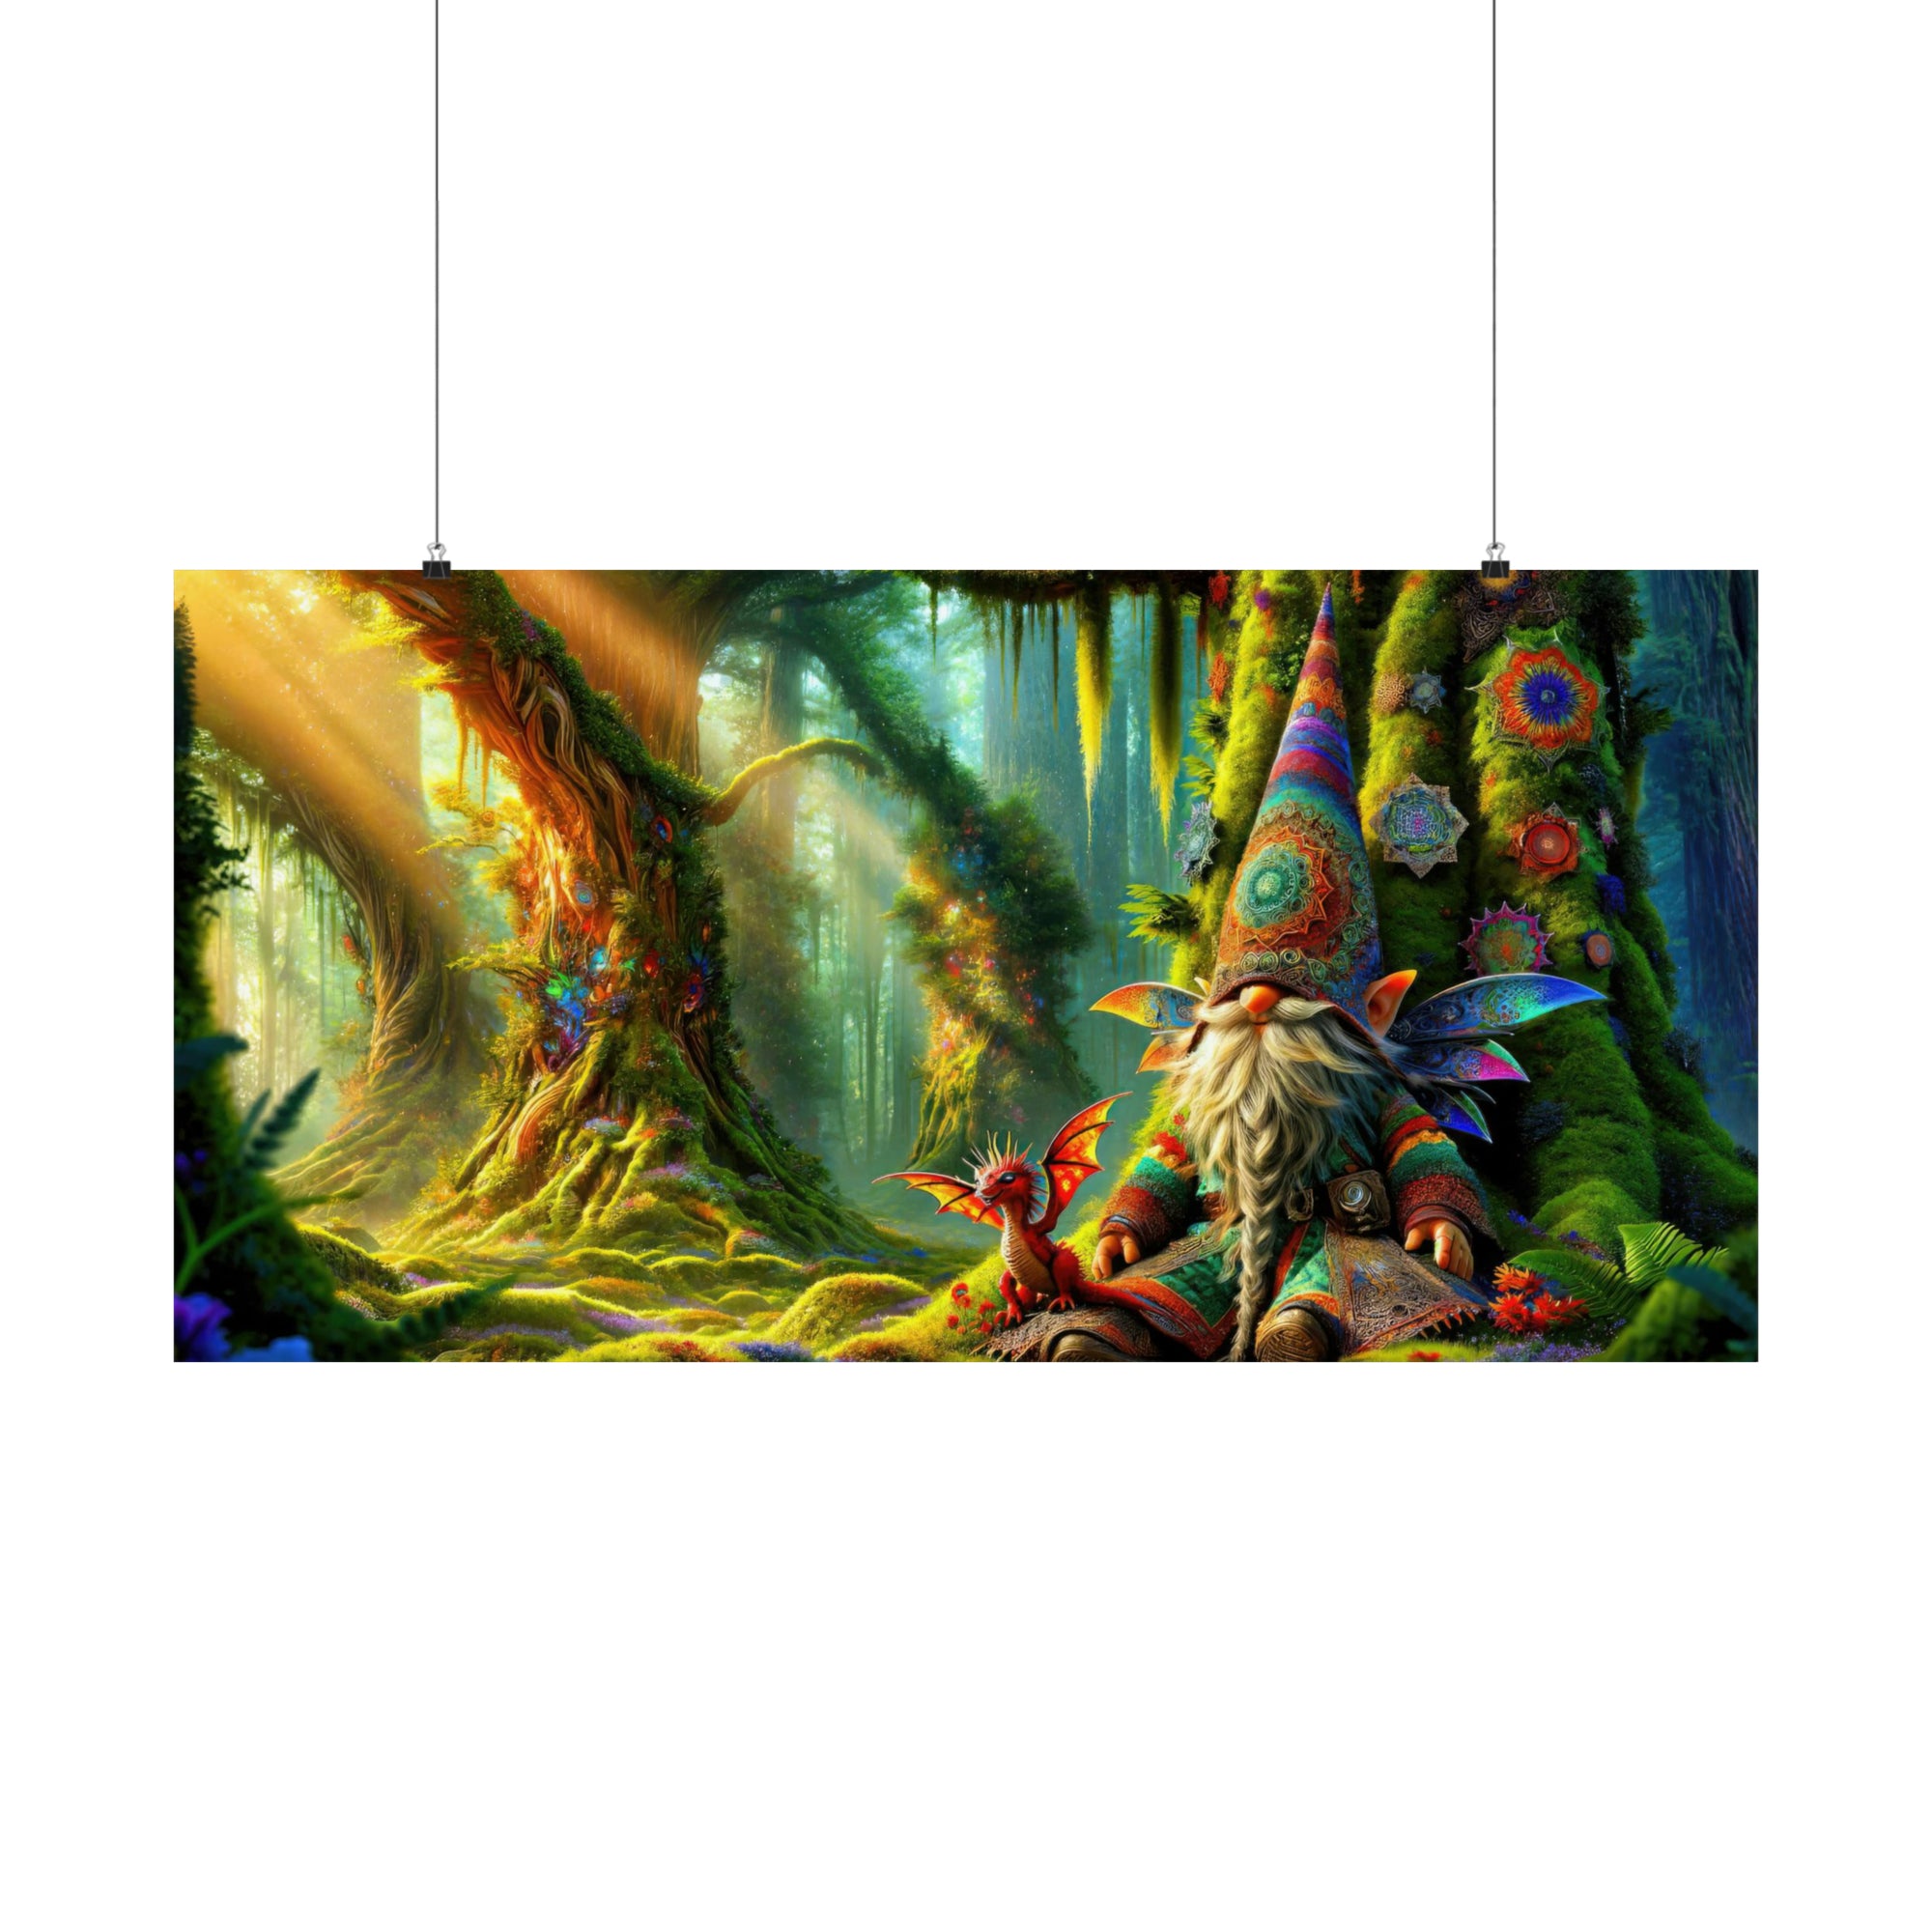 The Gnome's Enchanted Slumber Poster